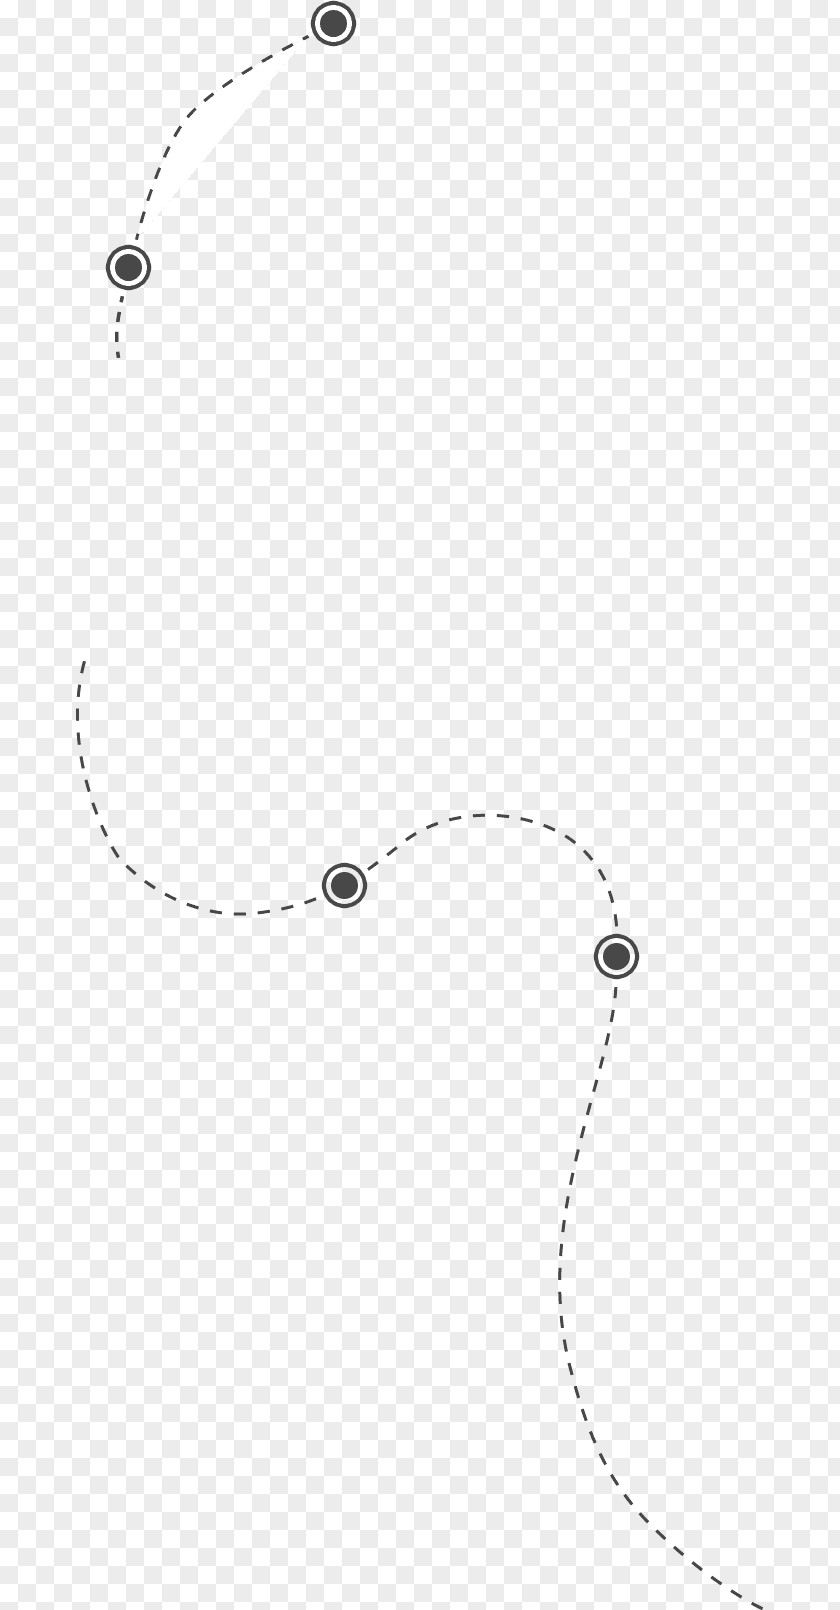 Doted Line Theme 0 PNG